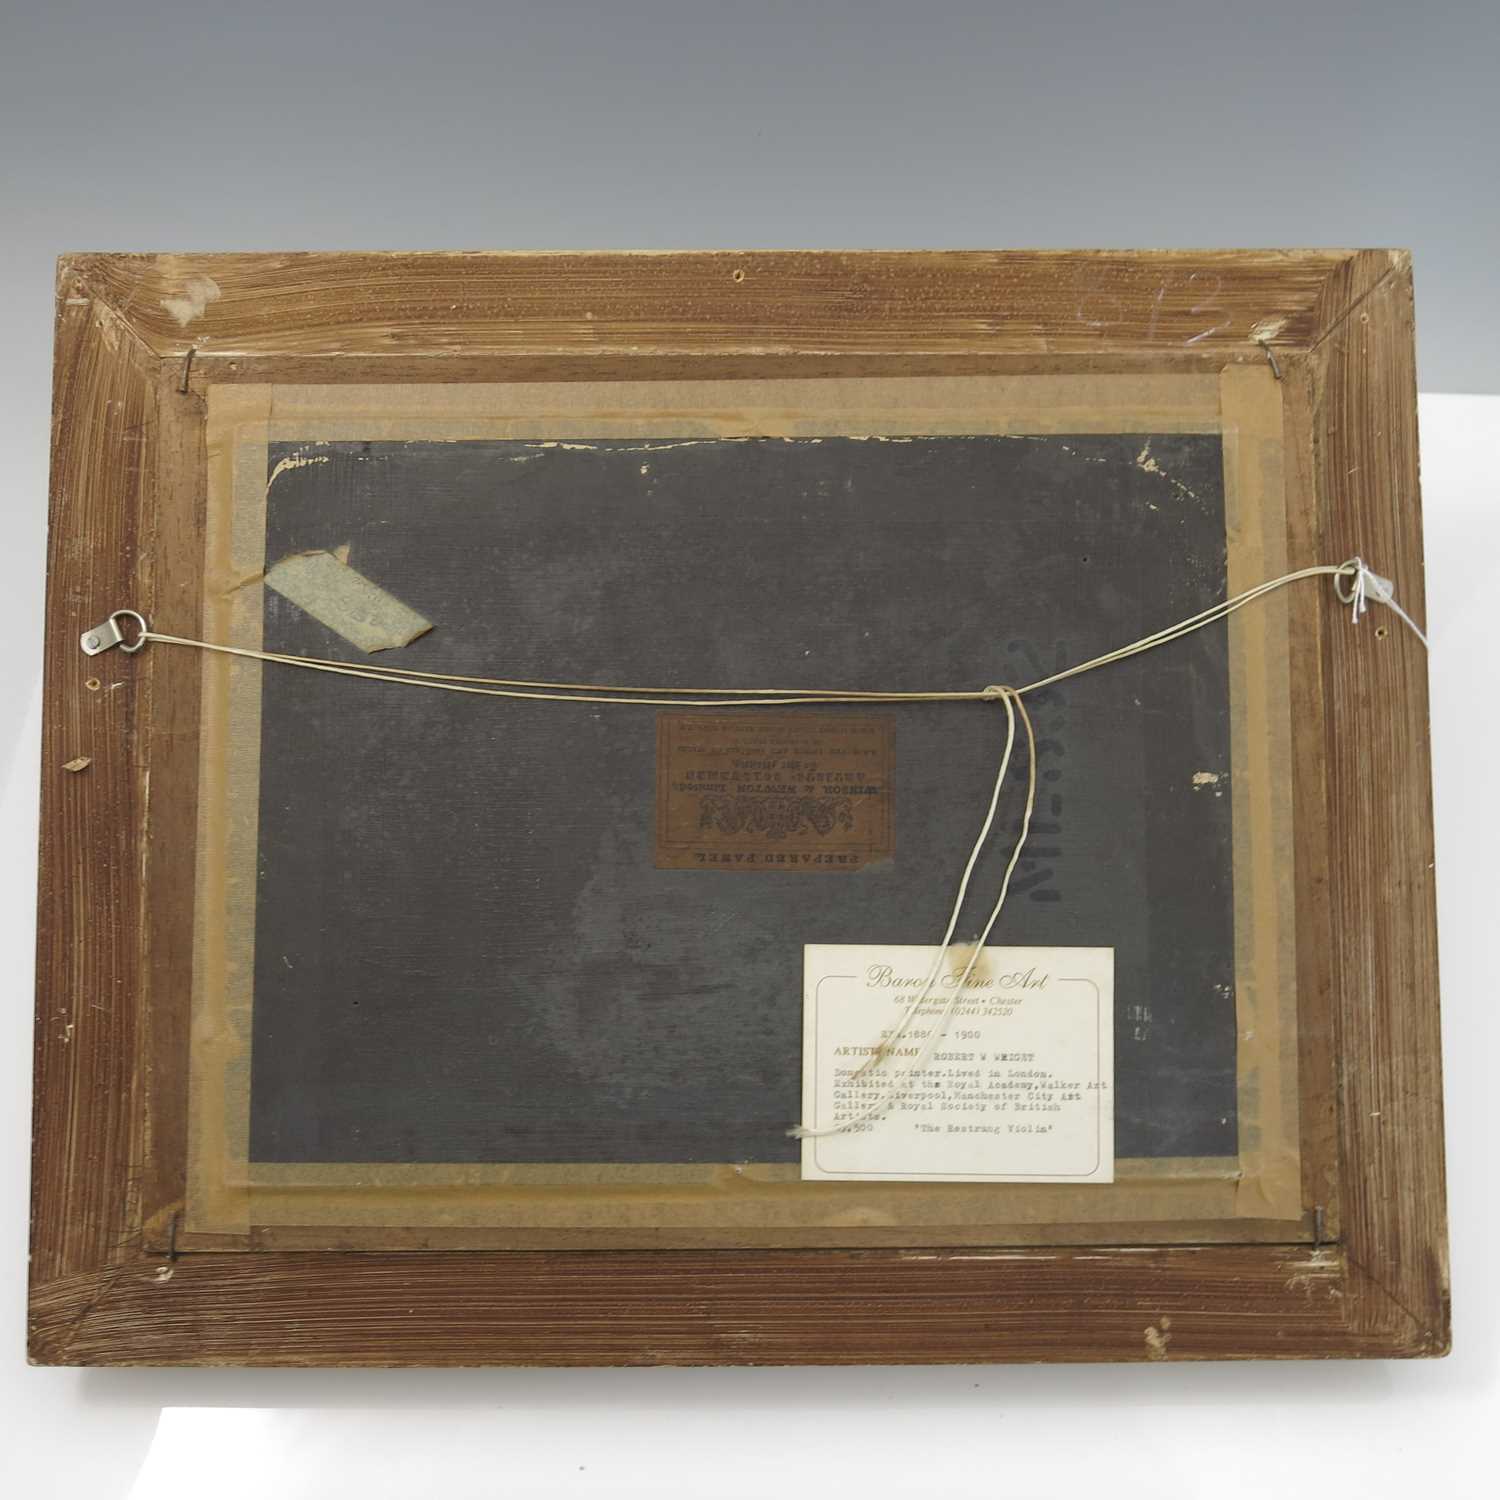 Robert William Wright (British, act.1870-1906), The Restrung Violin, signed l.r., titled verso, - Image 4 of 5